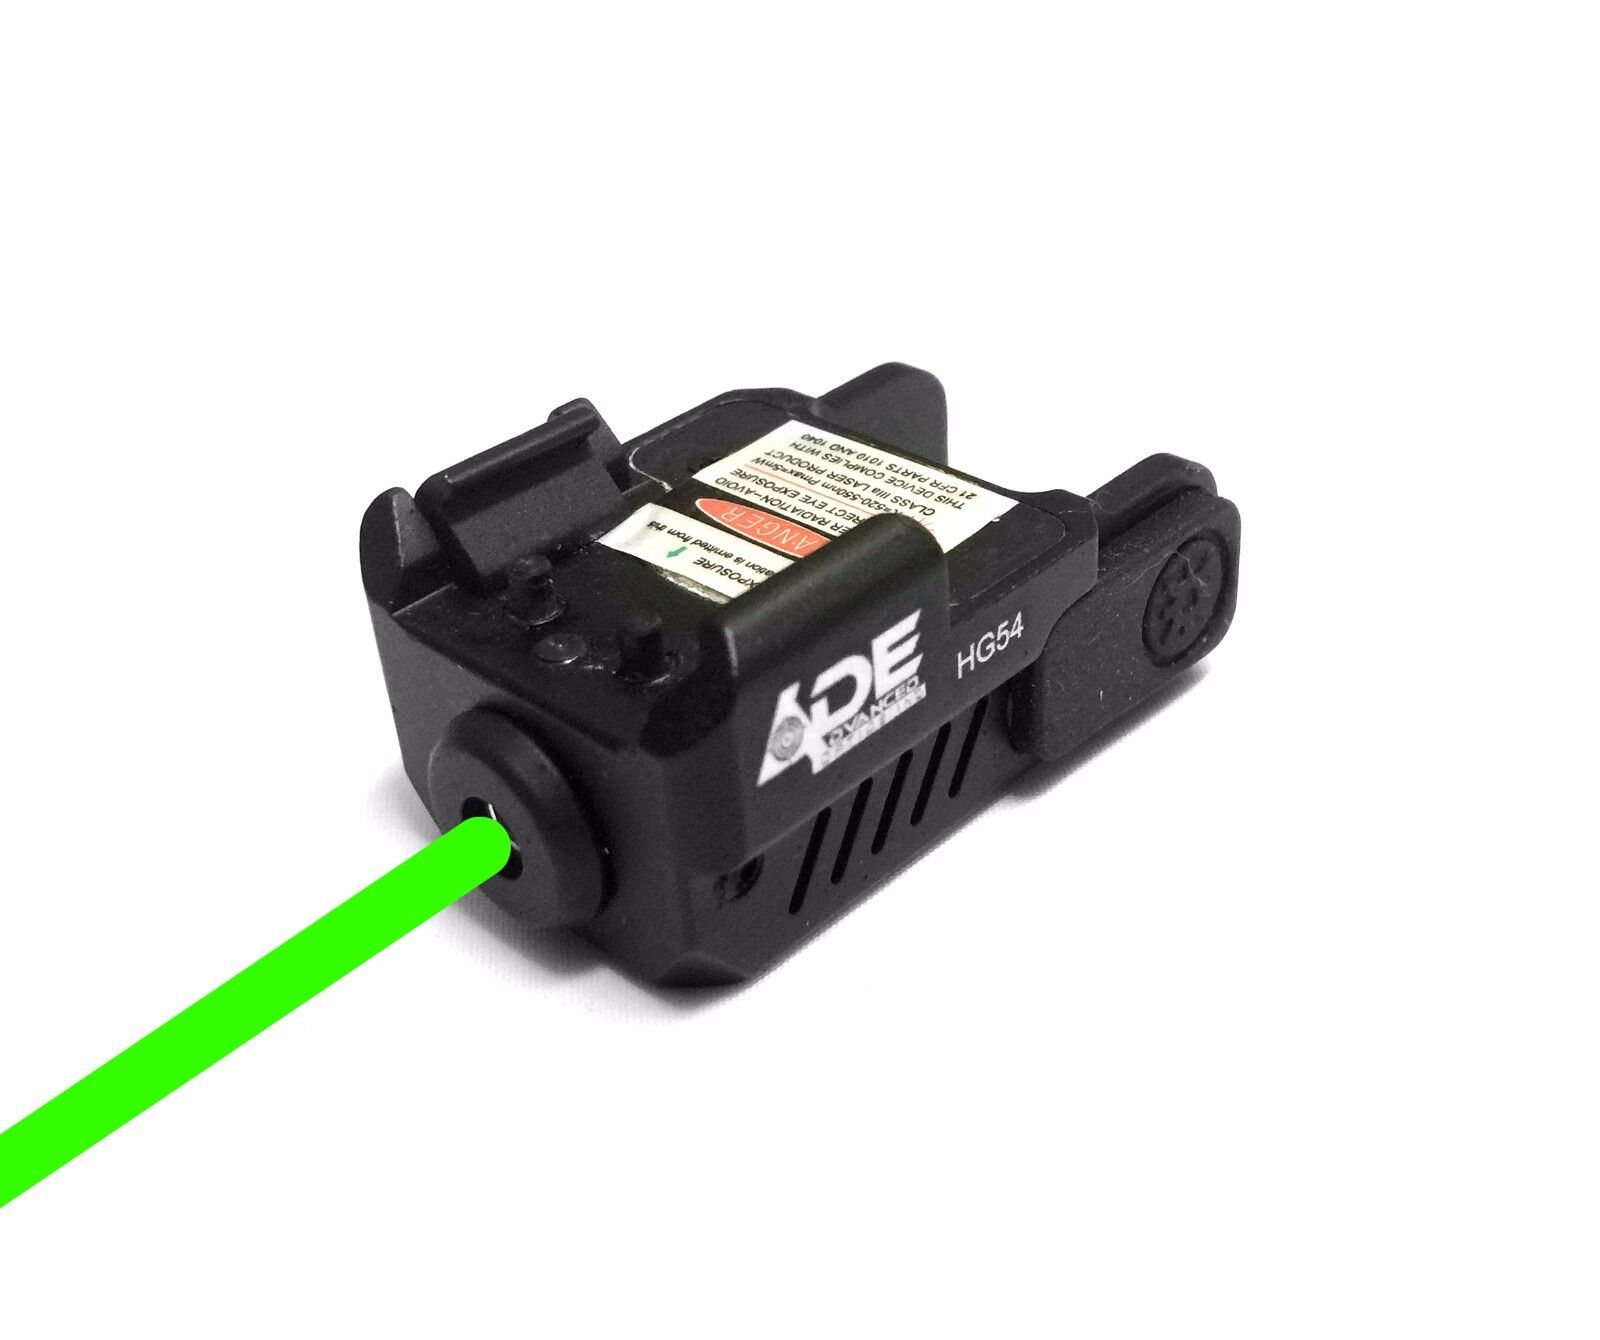 Super Compact Green Laser sight Fits All Full size hand gun _ sub-compact pistol